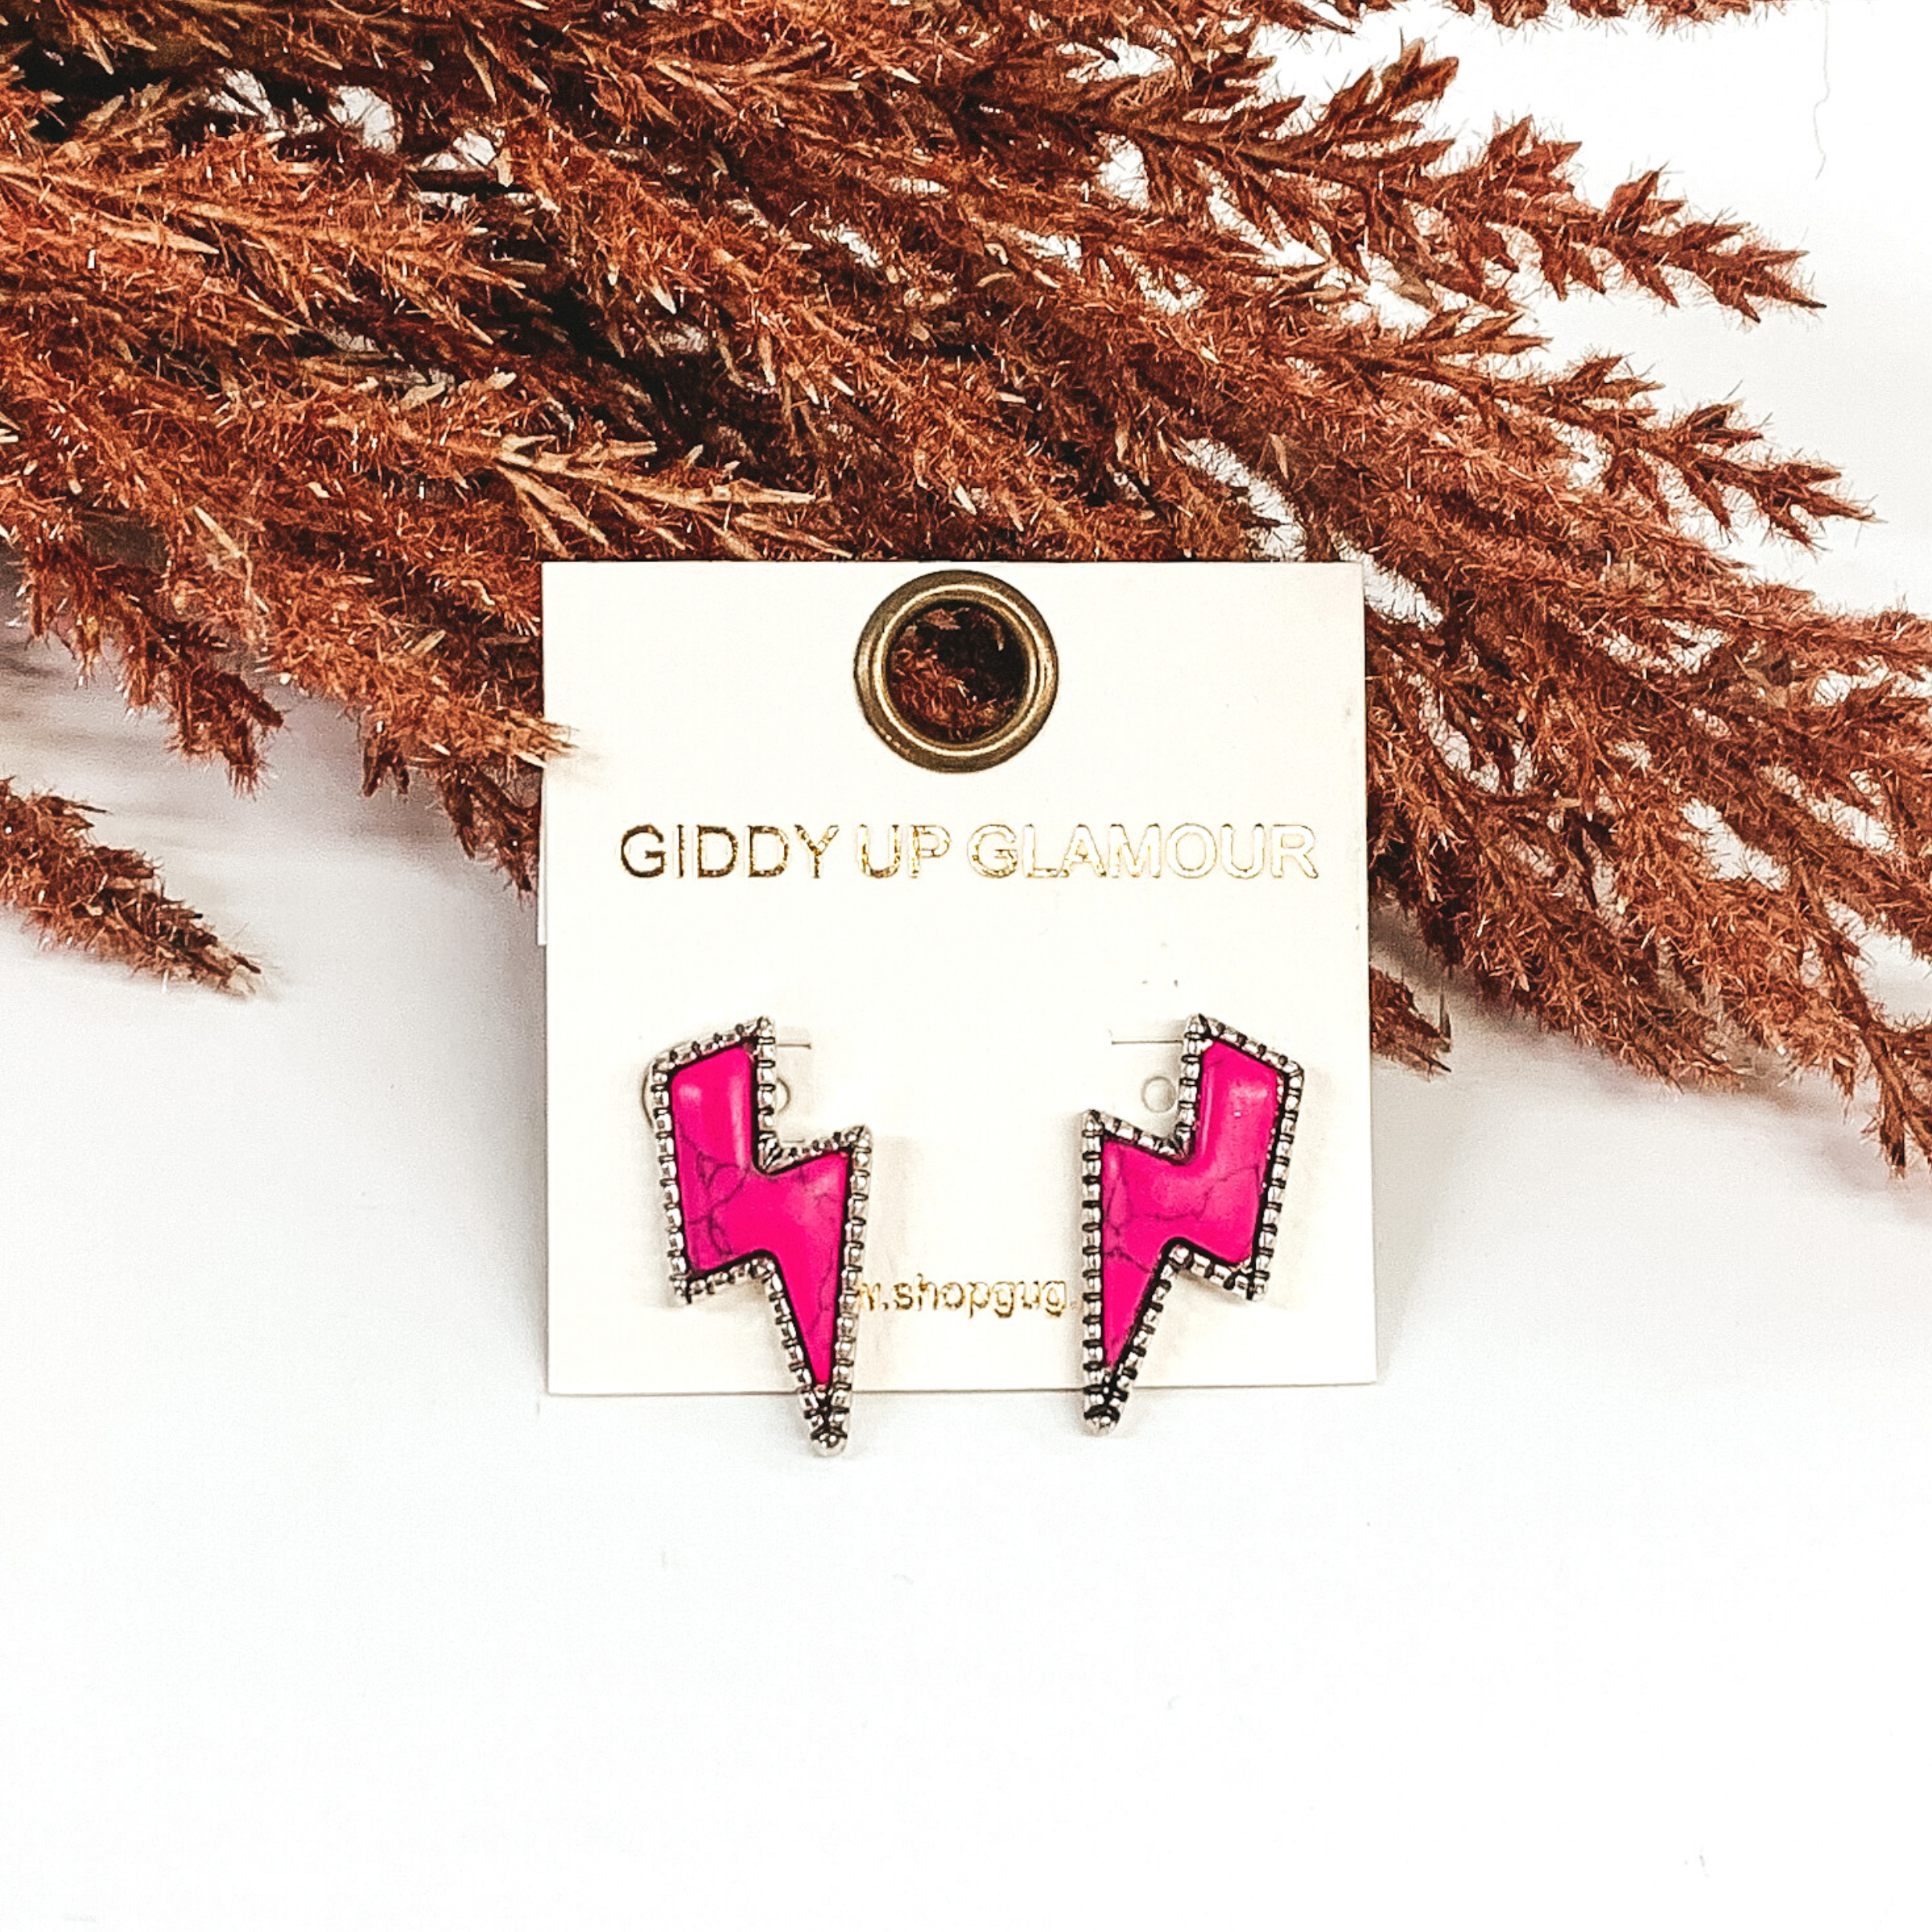 Pink stone stud earrings in a lightning bolt shape with a silver backing. They are pictured on a white background with brown floral decor. 